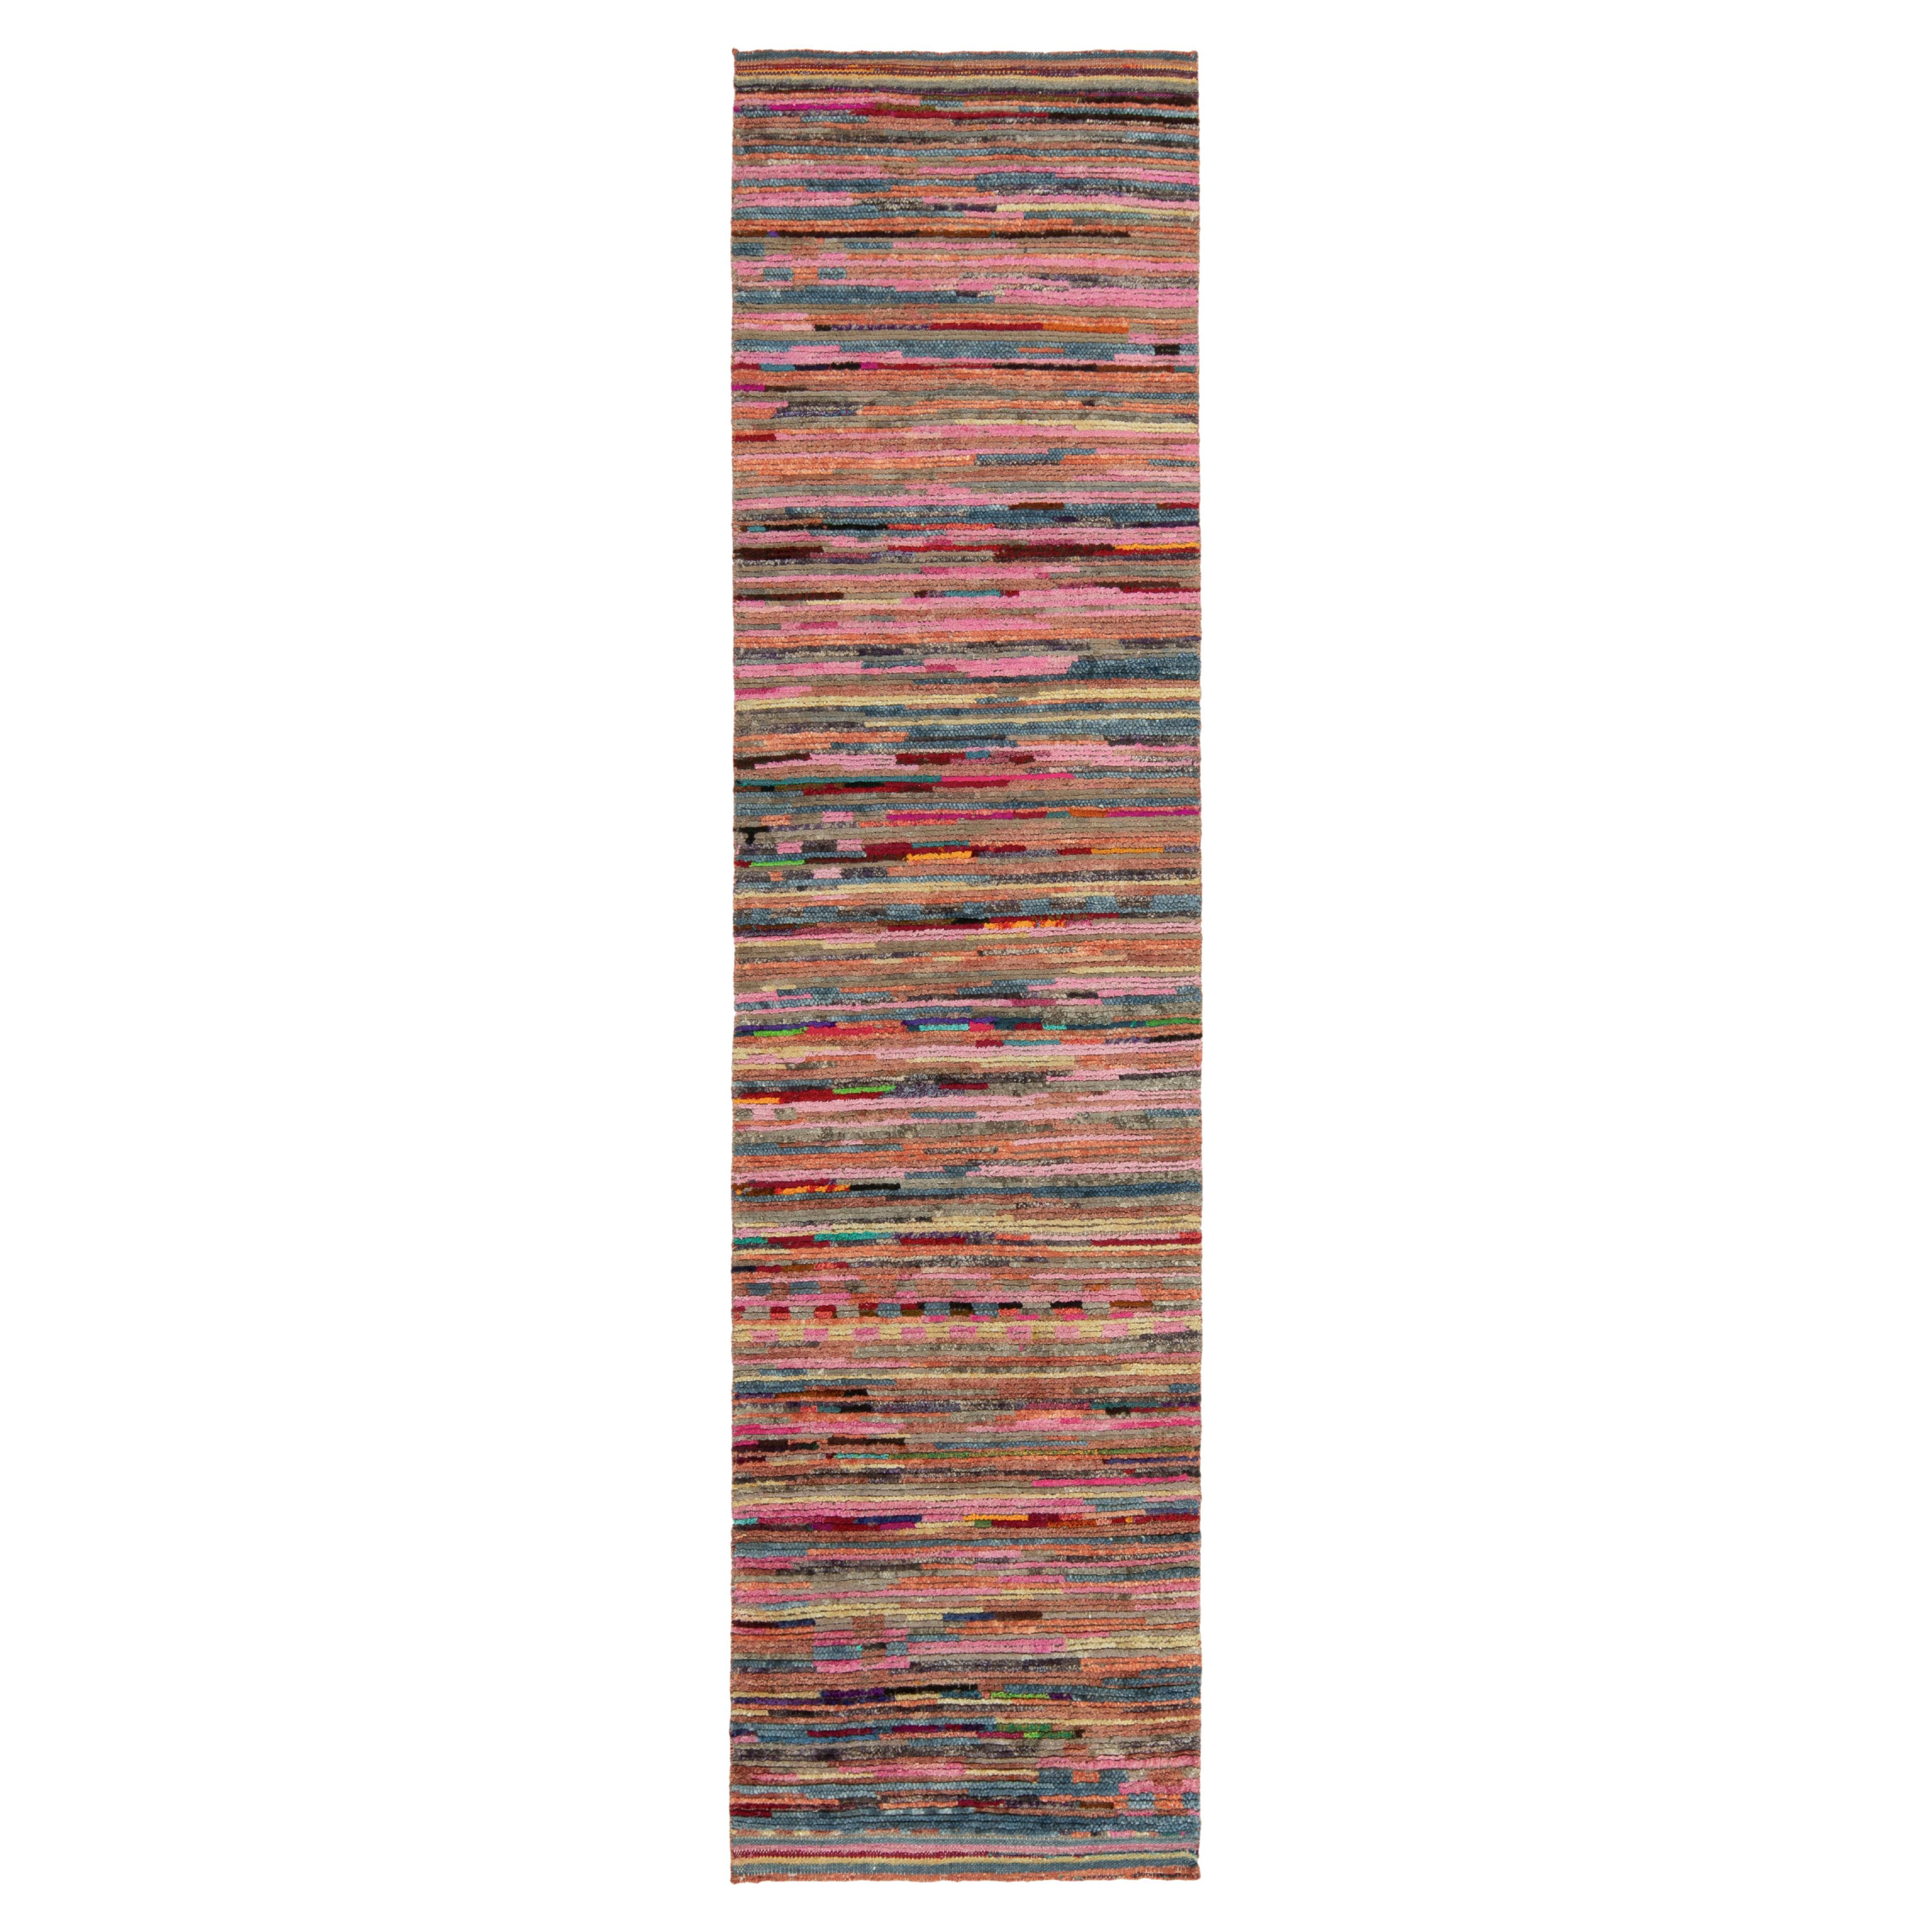 Rug & Kilim's Moroccan Tribal Style Runner in Pink, Multicolor Stripe Patterns For Sale